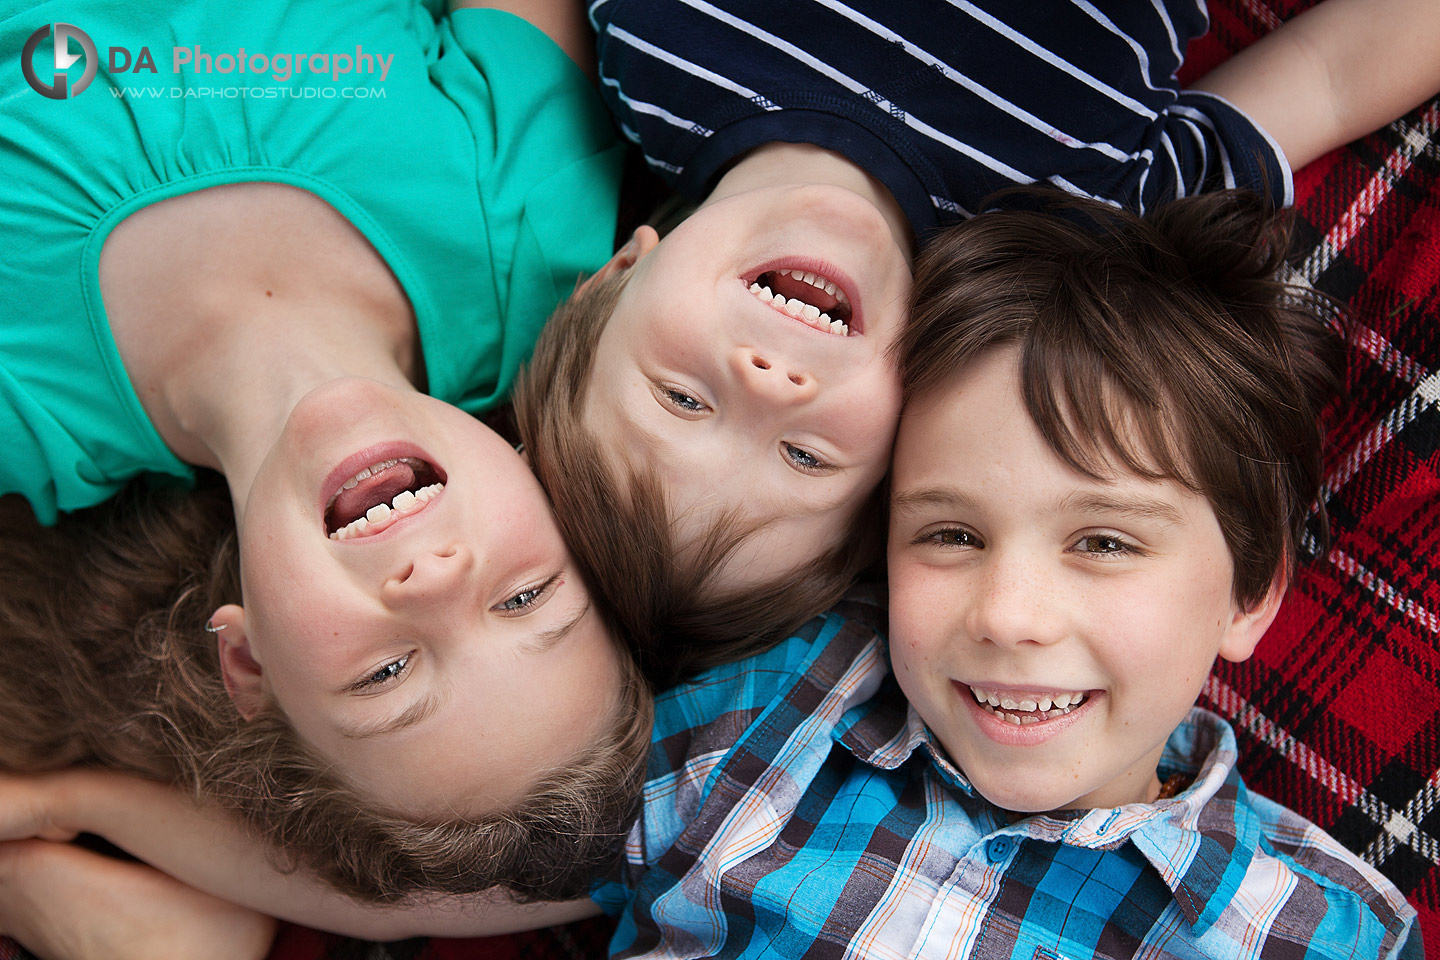 Goofing Around for Gigantic Smiles - Photographing Kids